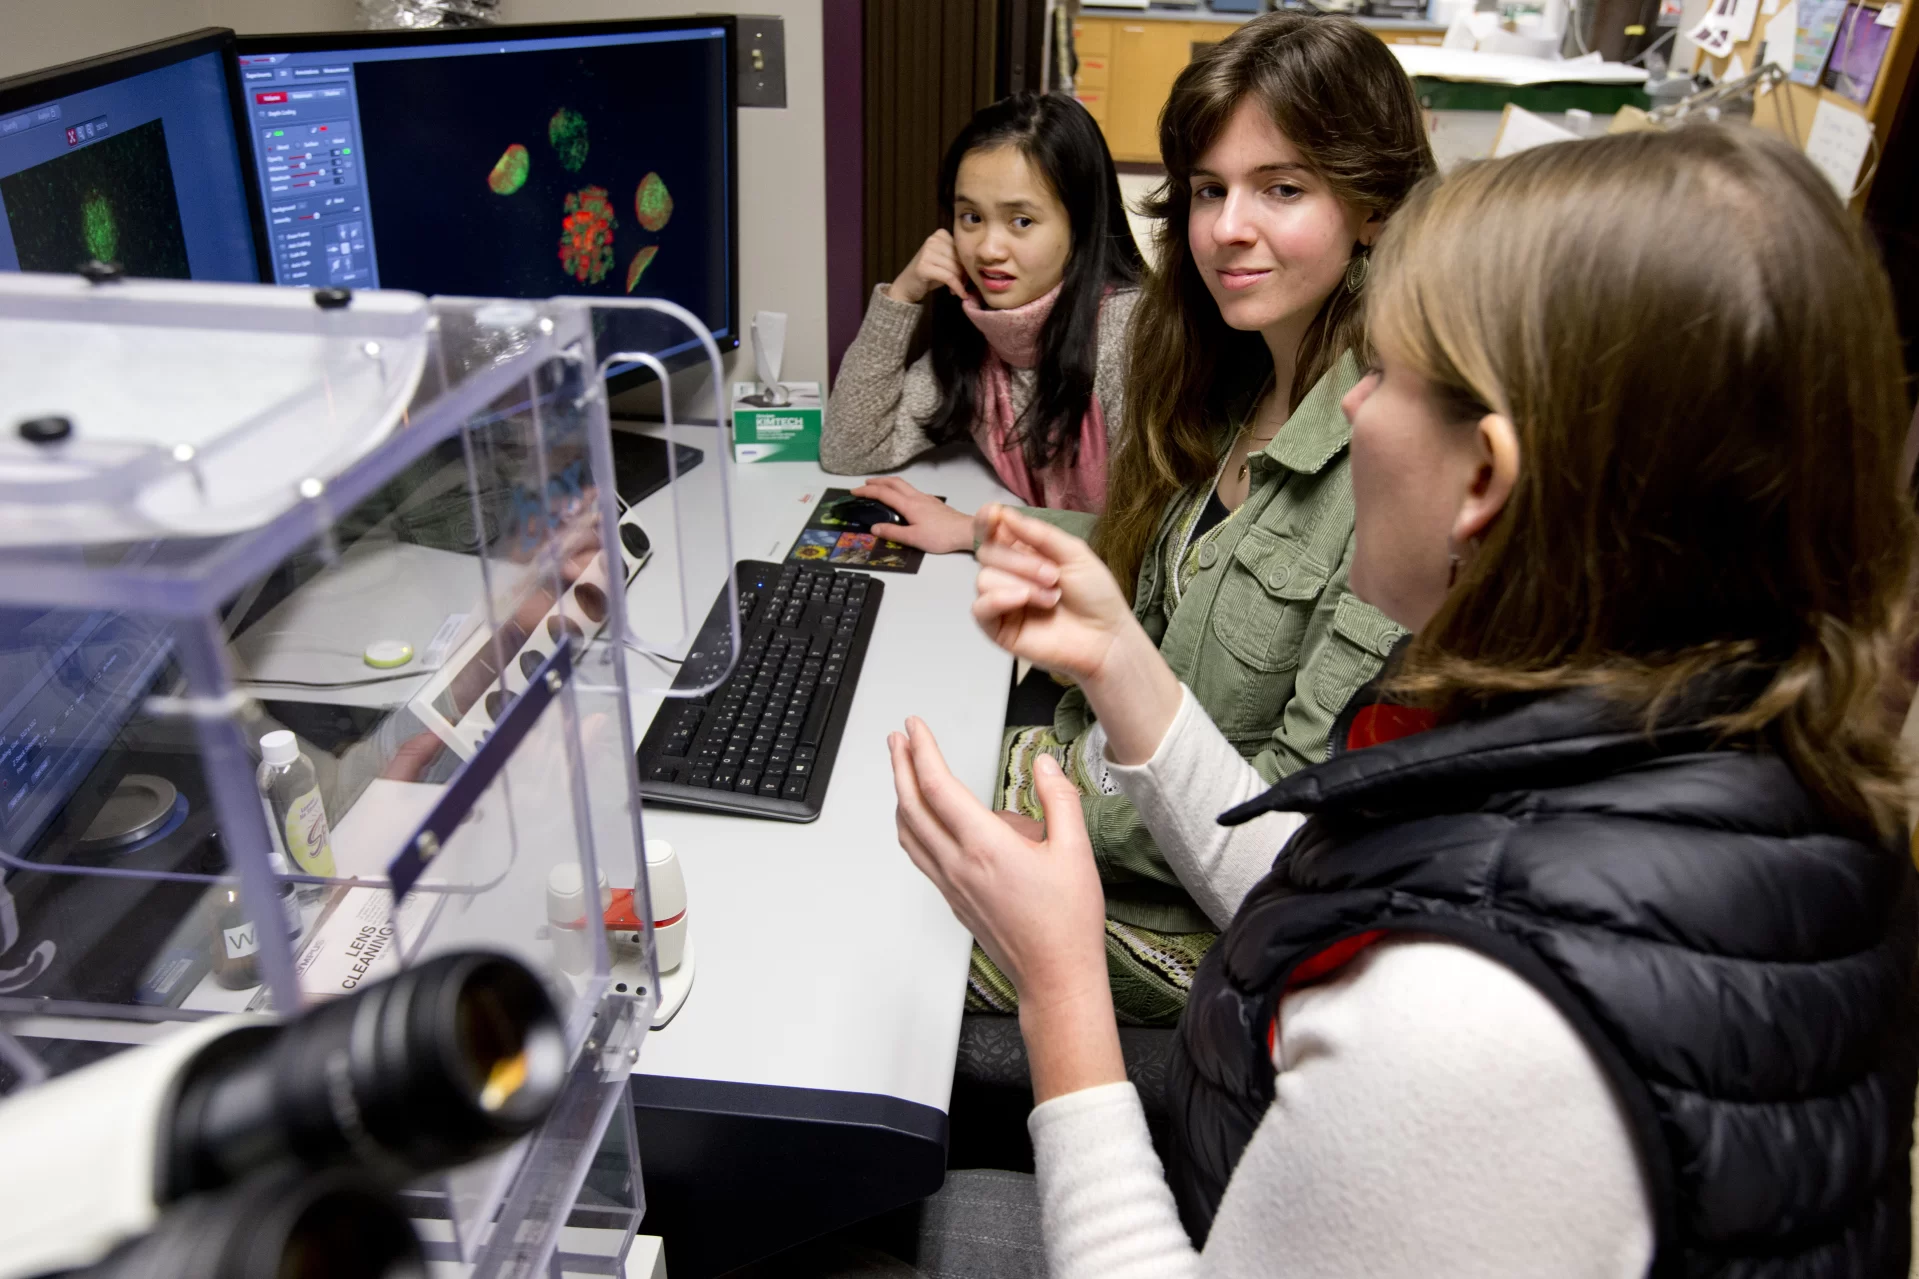 
The two women are thesis students of Professor Wiliams. She is using images of histones (proteins that package DNA) provided by Assistant Professor Physics Travis Gould in a training session on the microscope in Room B10 of Carnegie Science.